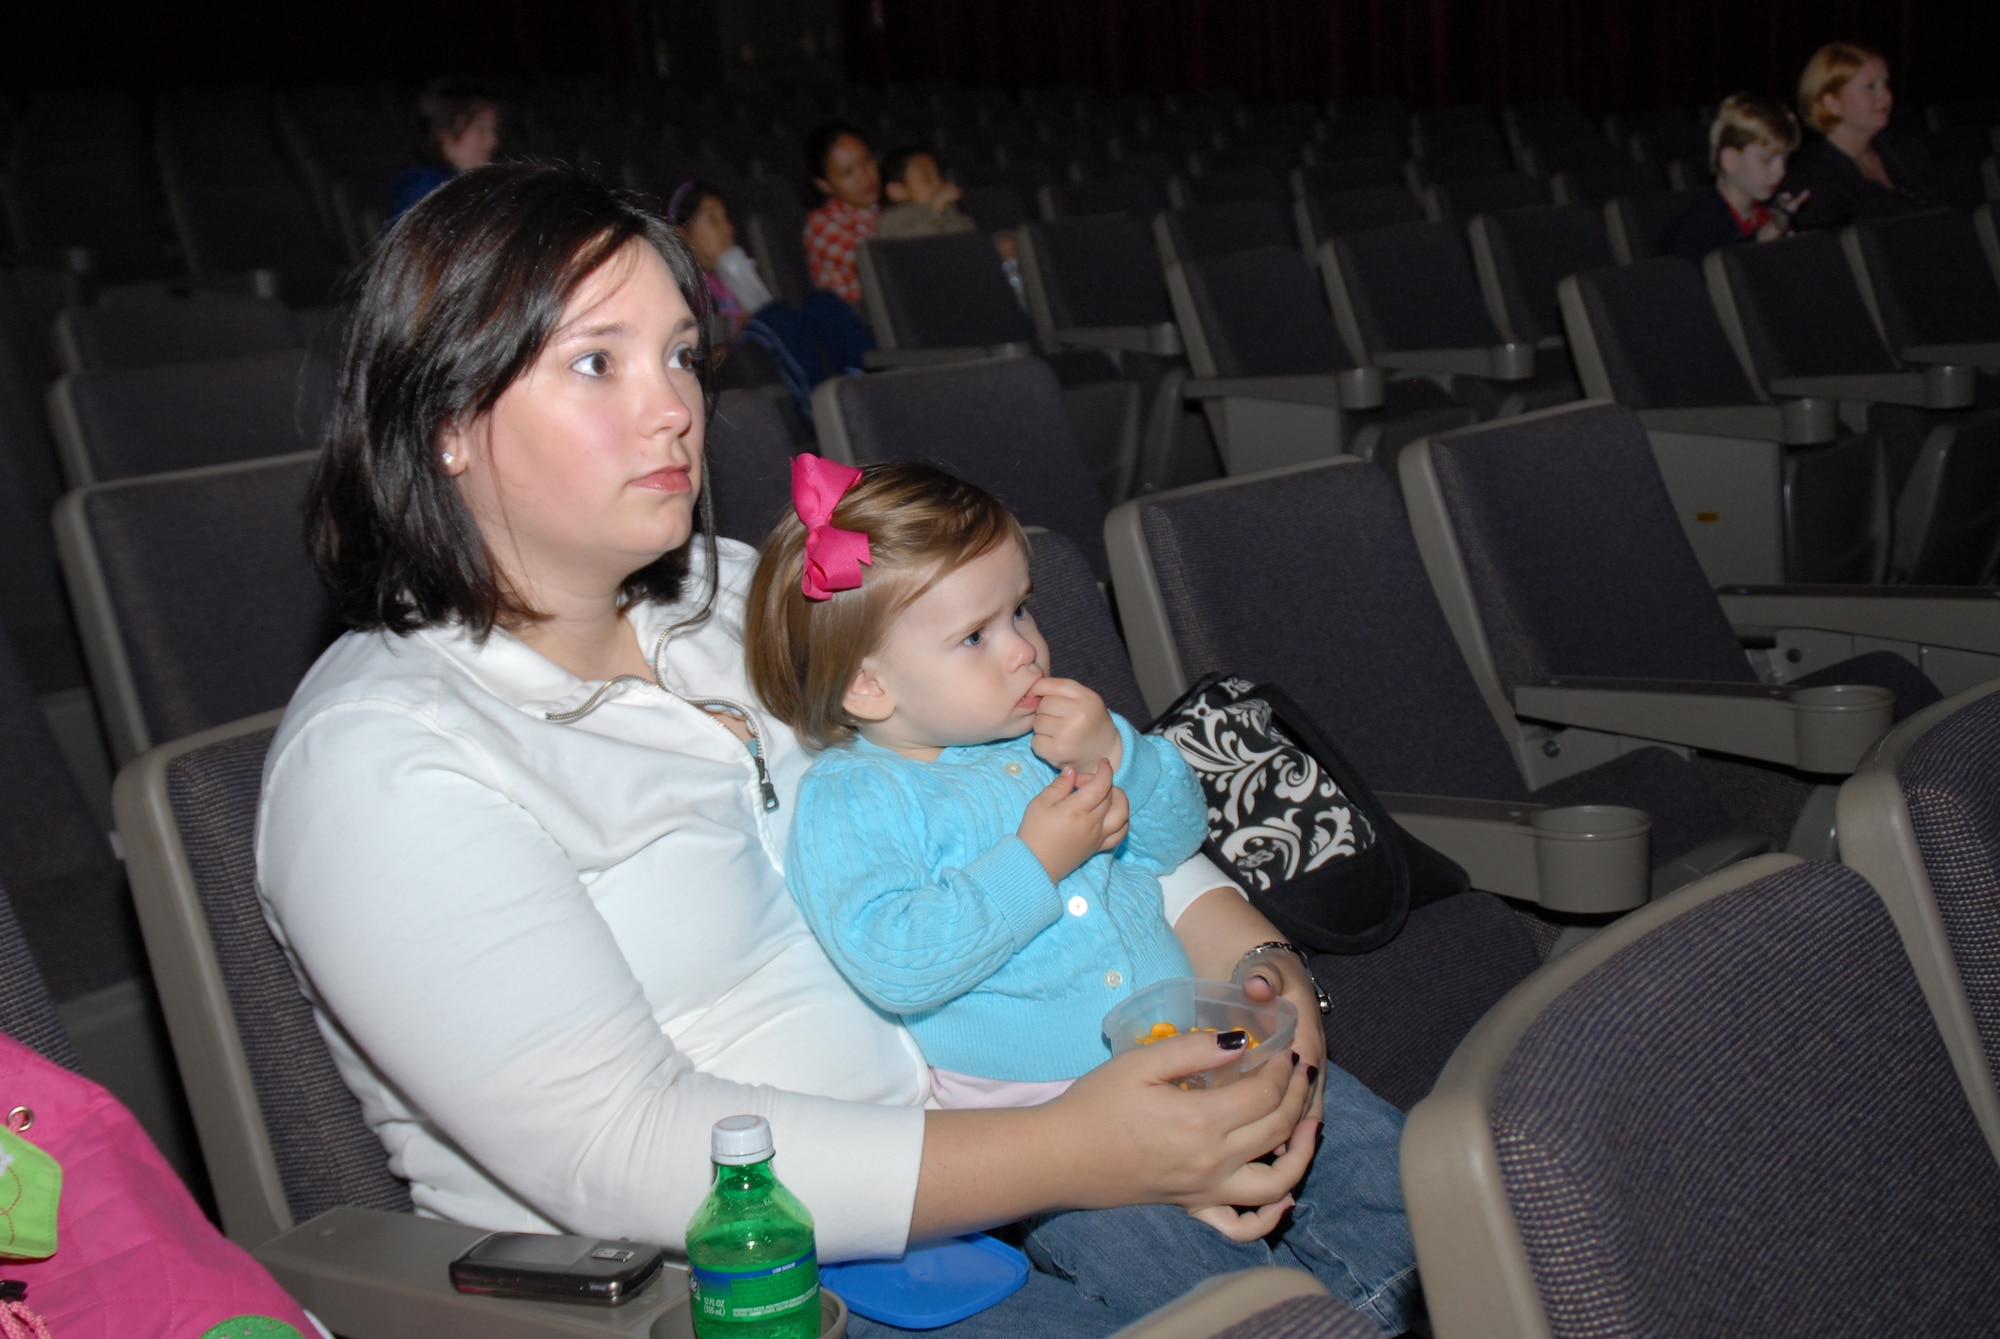 Kristen Boyer and Brooke Boyer, family members of Tech. Sgt. Casey Boyer, 19th Logistics Readiness Squadron aerial delivery supervisor, attend a special screening Nov. 14 of the Disney Pixar film “Finding Nemo” for children with special needs. The event was sponsored by the base’s Exceptional Family Member Program. (U.S. Air Force photo by Senior Airman Nathan Allen)